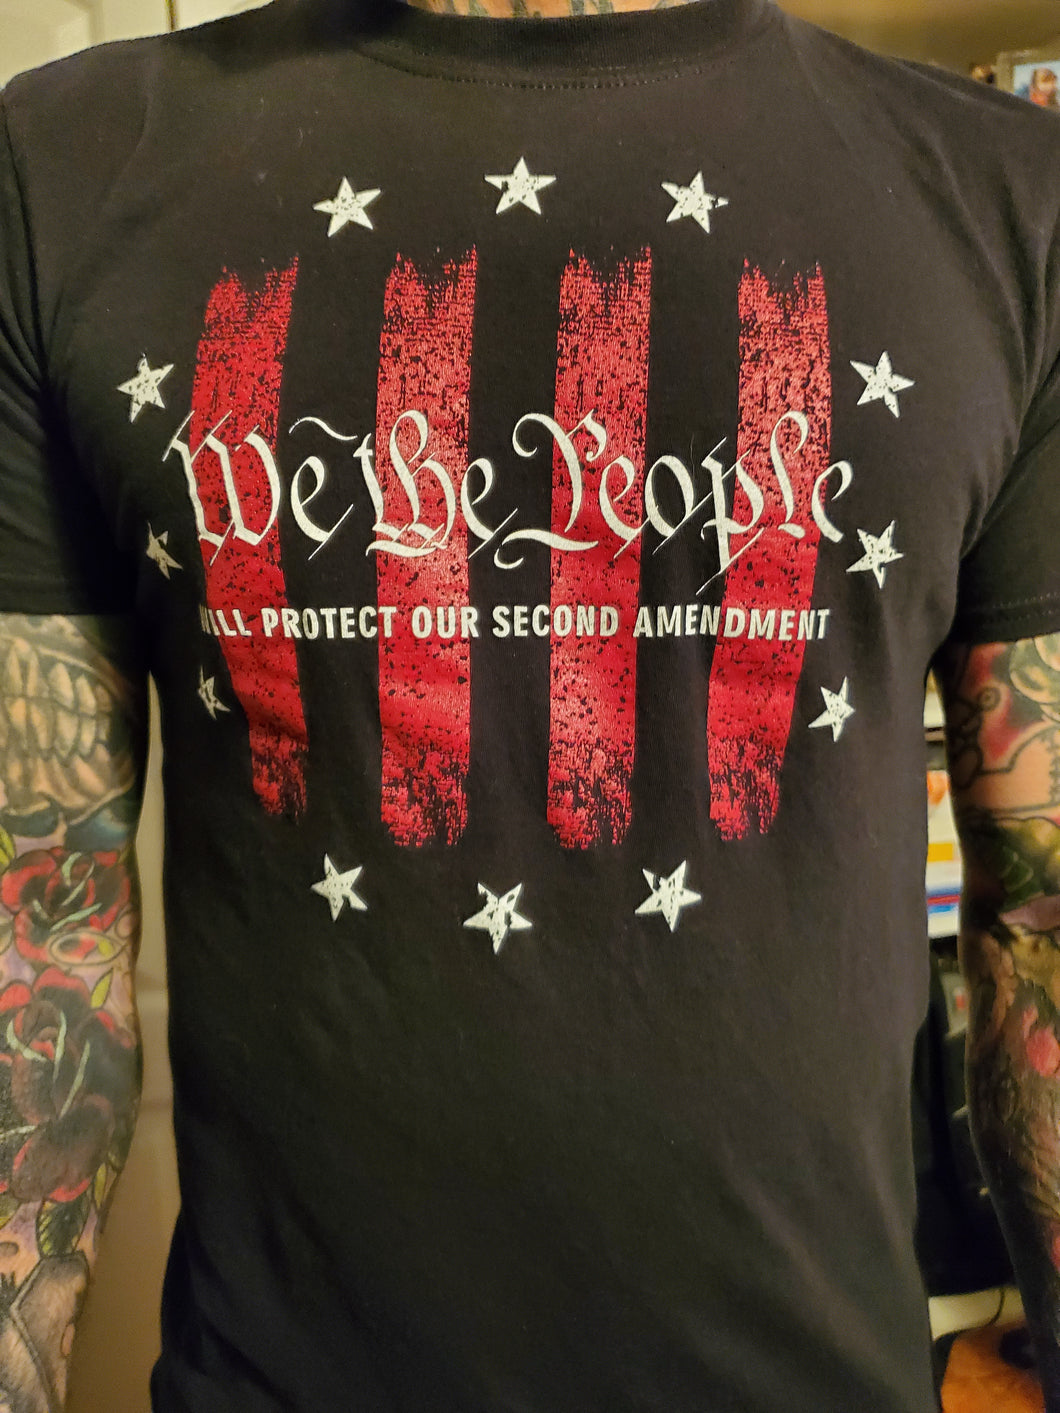 We the People Crew Neck T-Shirt